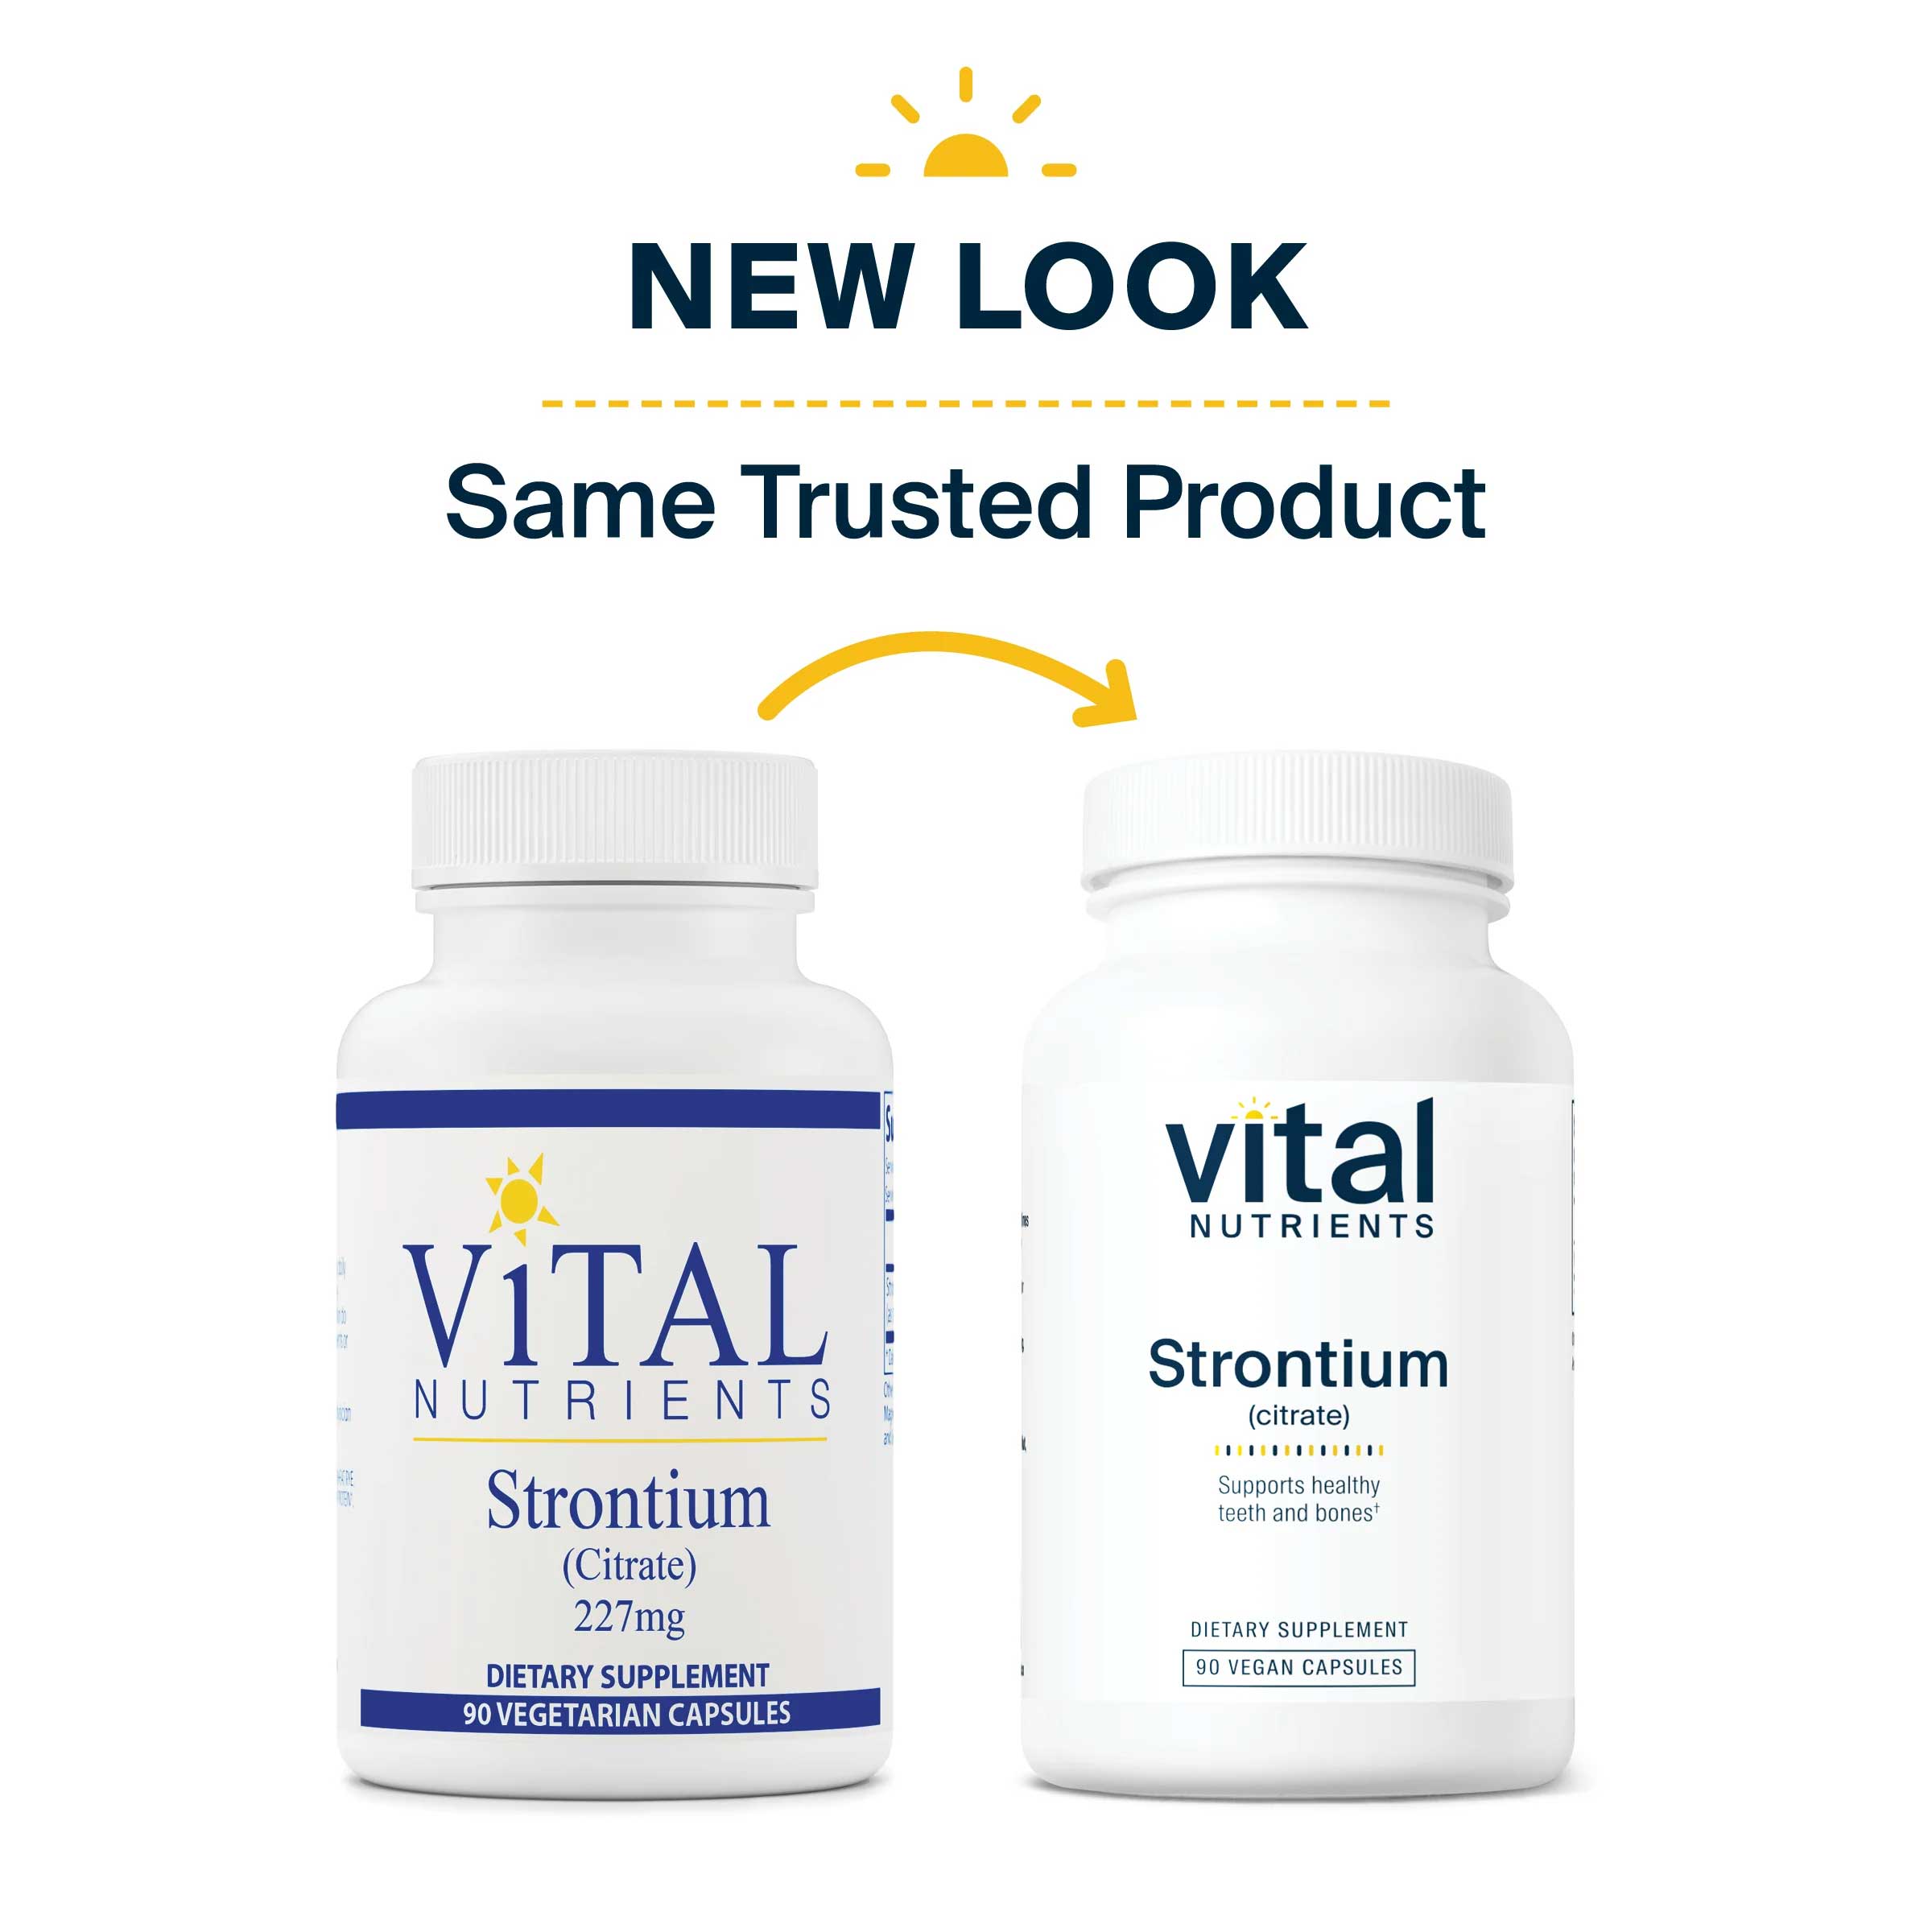 Vital Nutrients Strontium (citrate) 227mg New Look